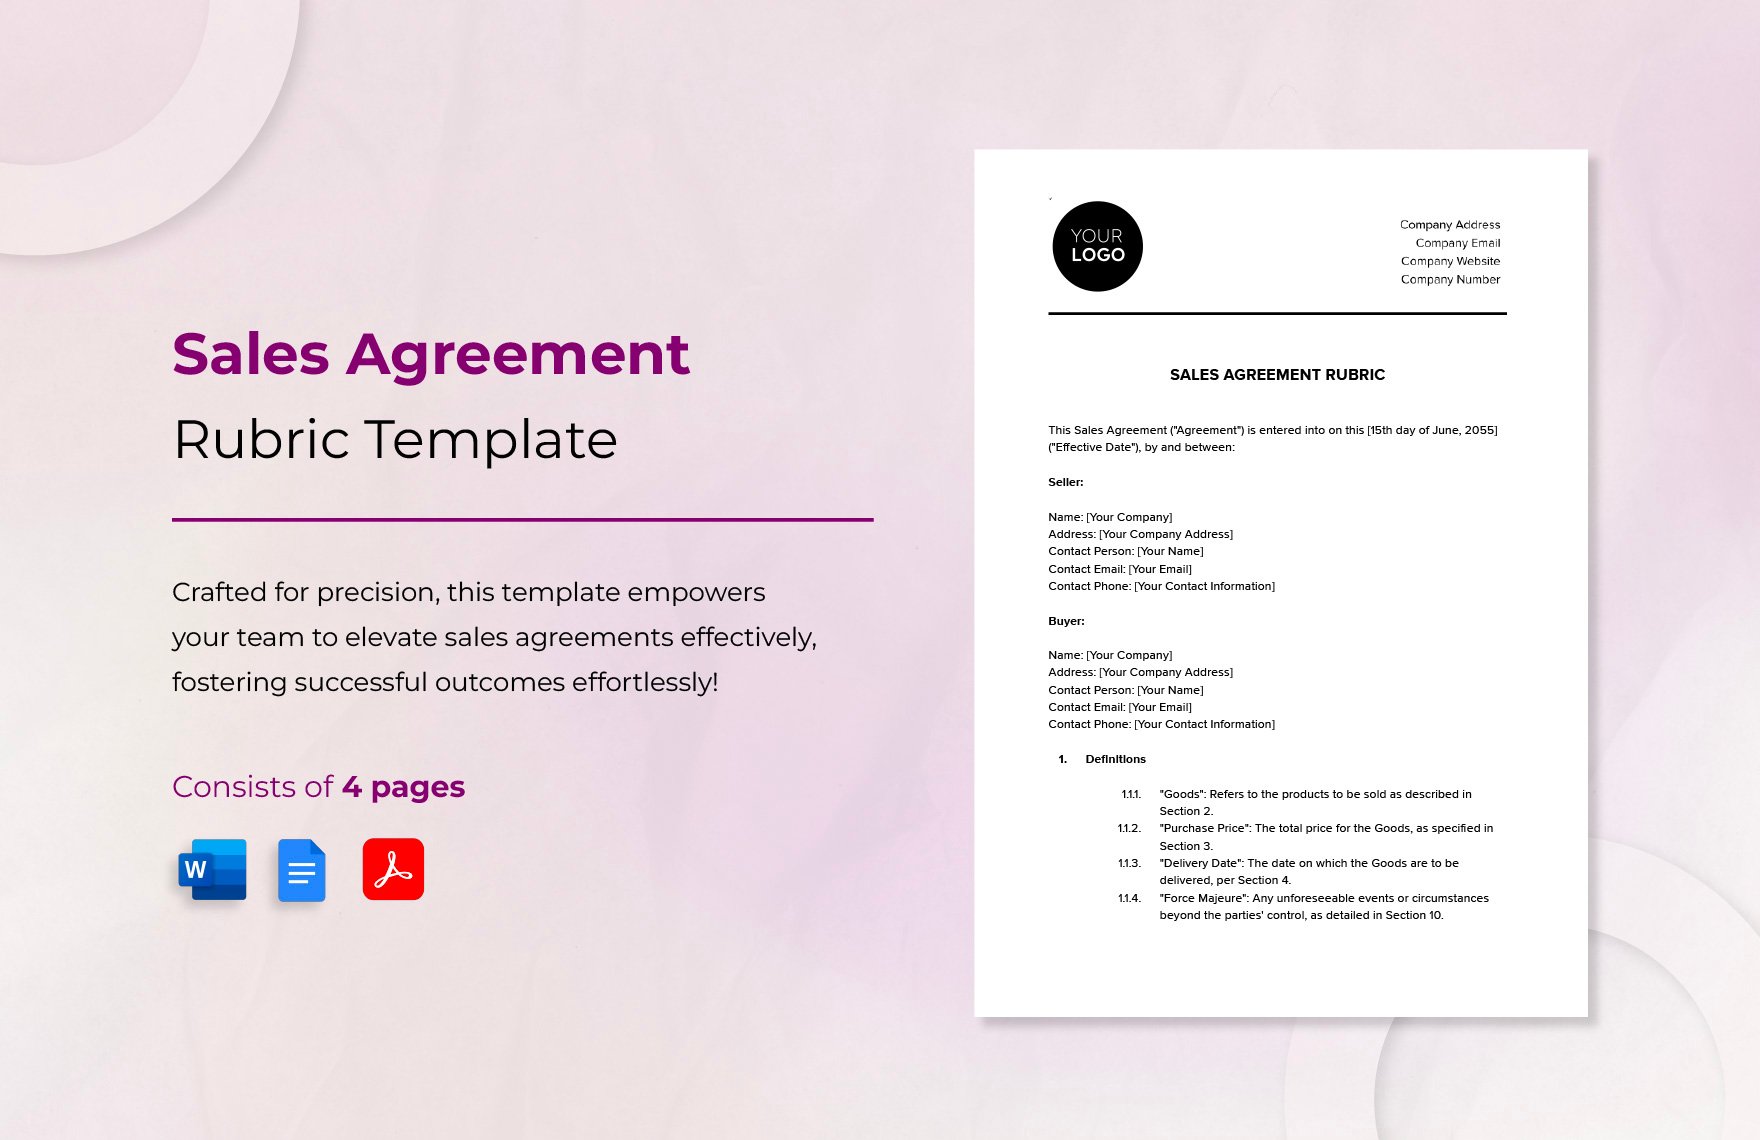 Sales Agreement Rubric Template